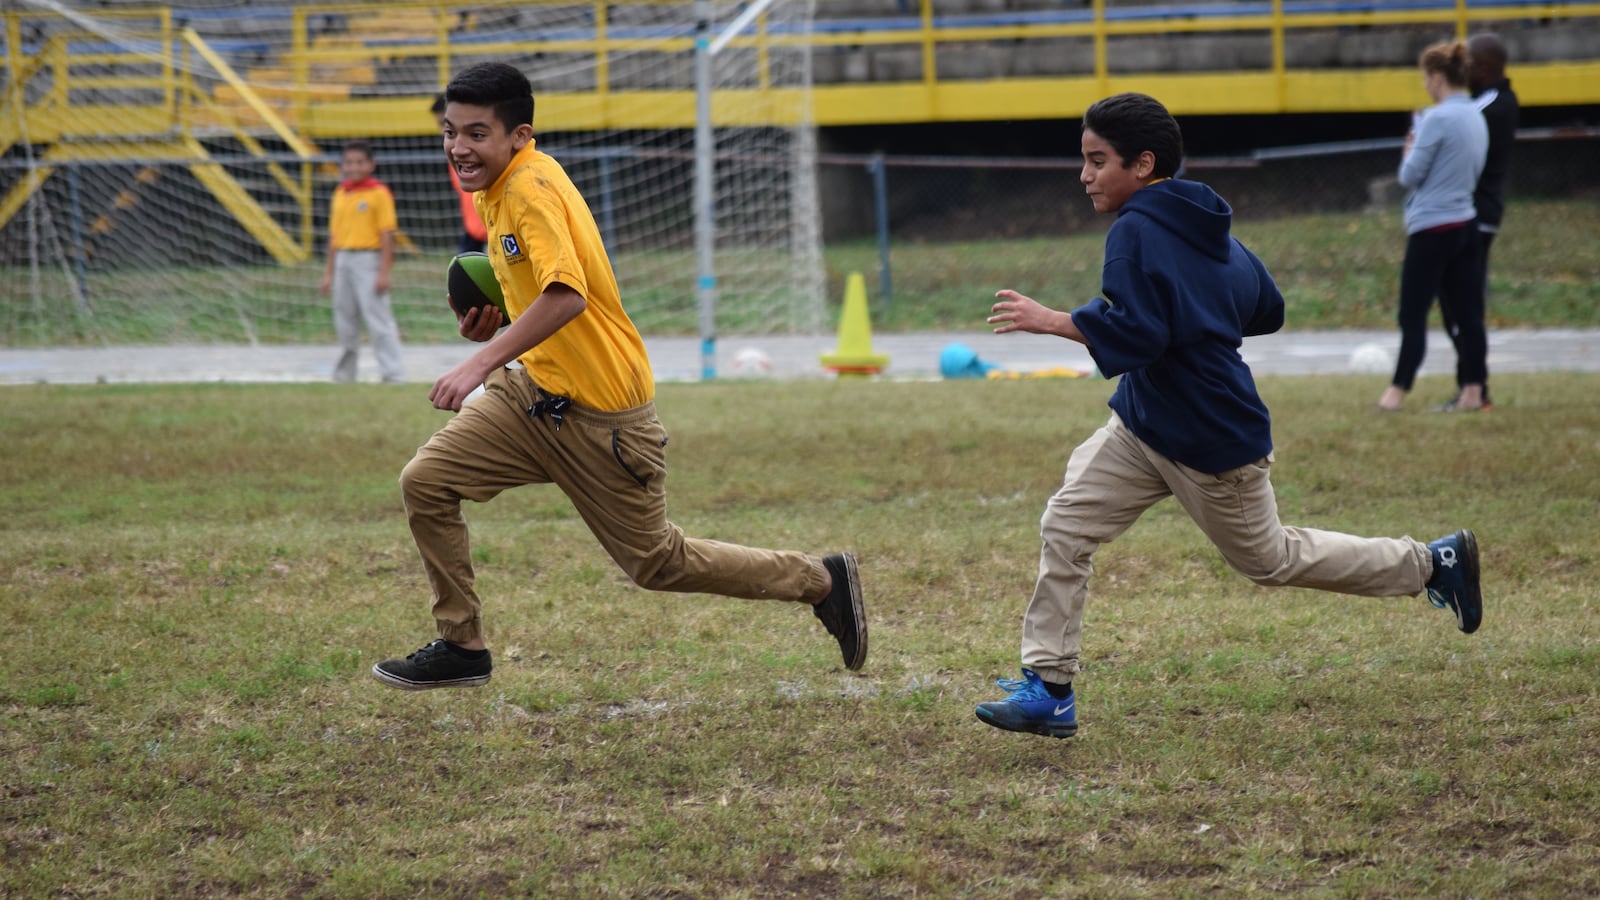 Nashville students play during recess at a charter school operated by LEAD Public Schools.